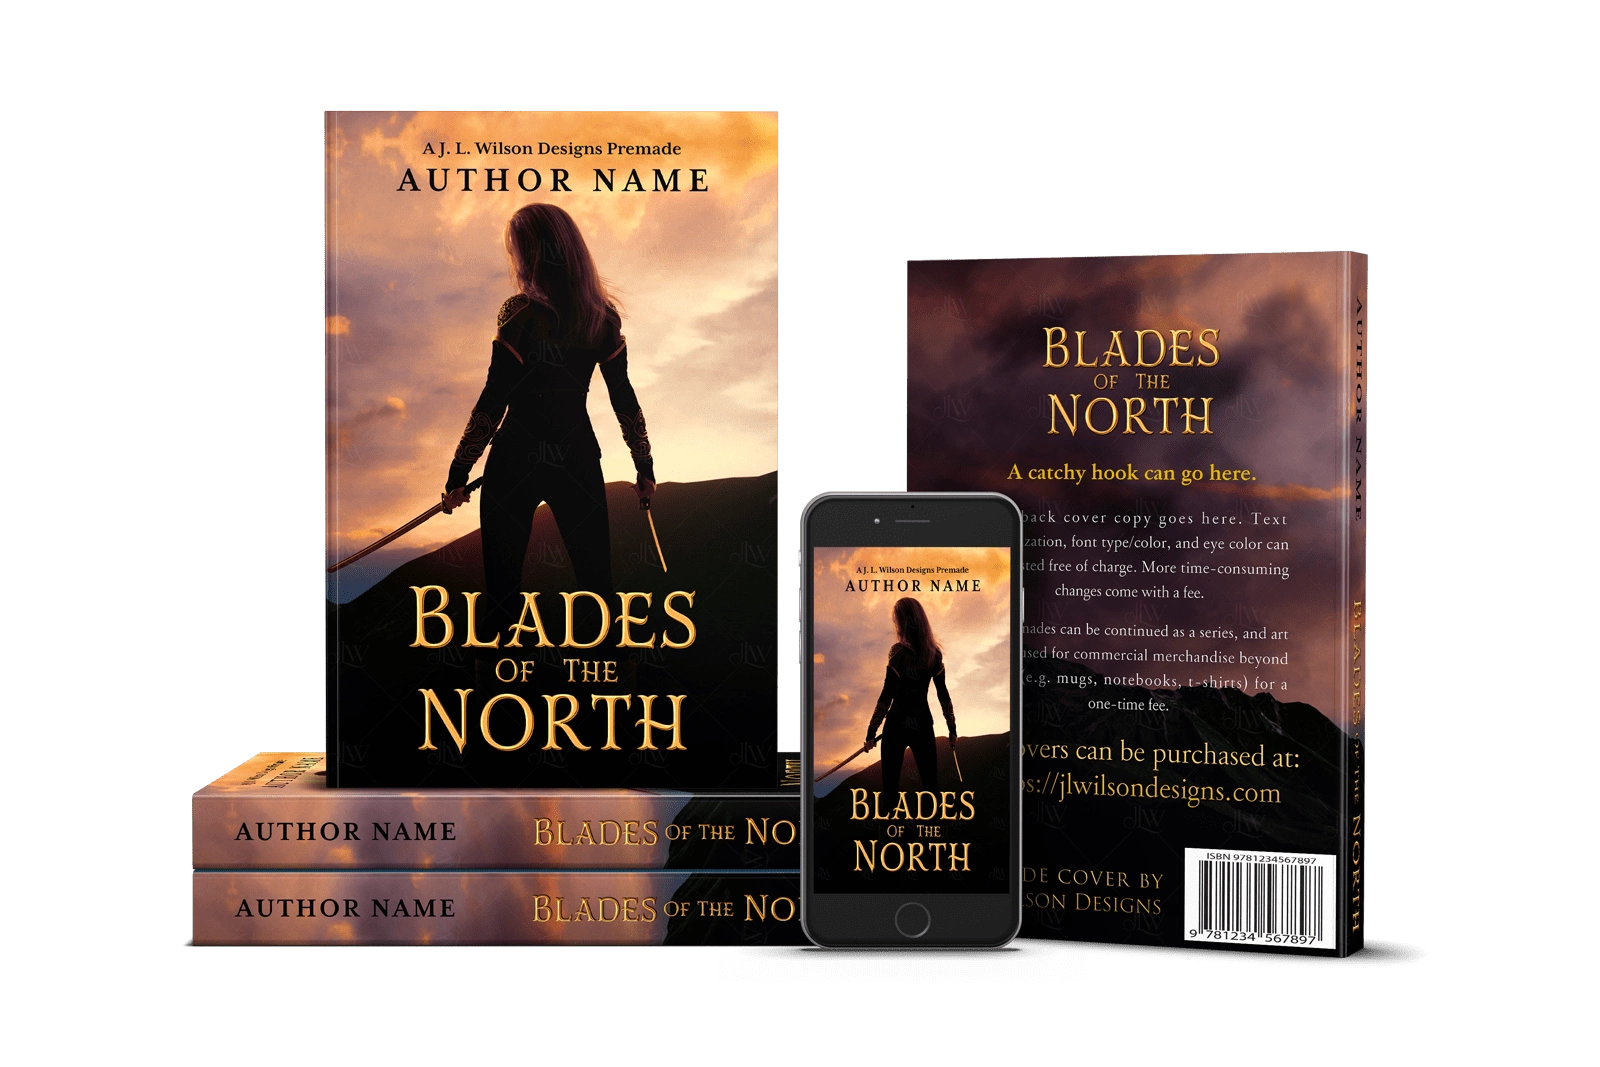 An epic fantasy book cover with a warrior woman holding swords at sunset against a mountain backdrop